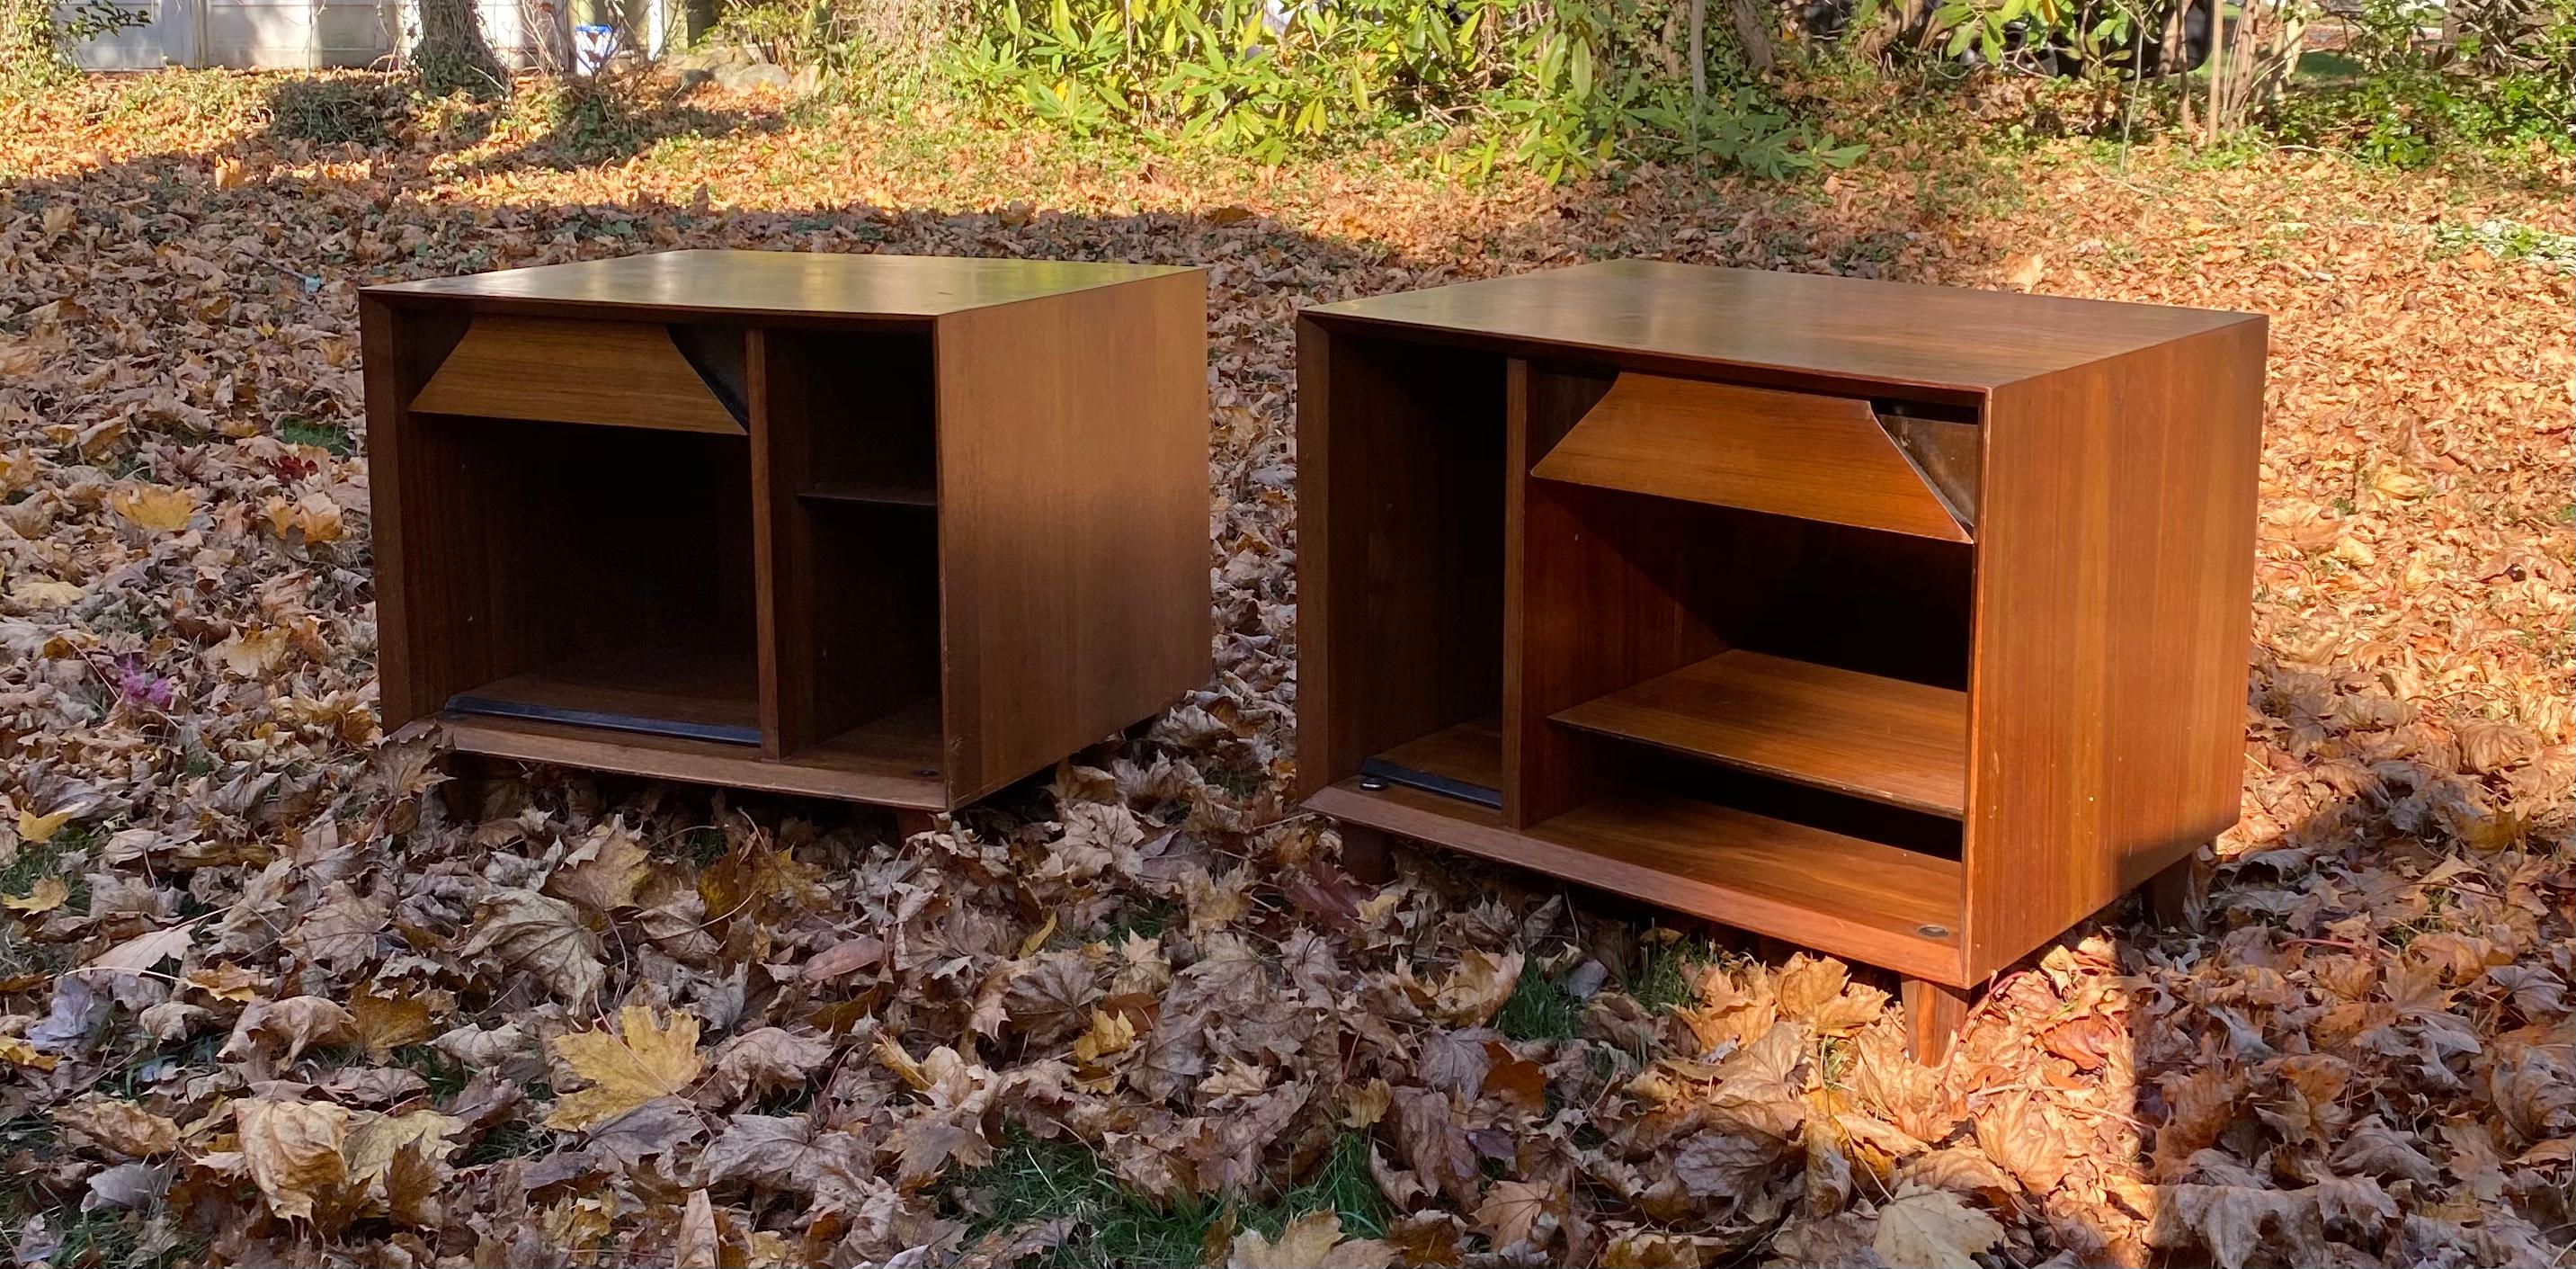 Pair of Mid-Century Modern walnut nightstands by Marc Berge for Grosfeld House. Two nightstands, each with an open cubby with shelf and divider panel at bottom and drawer above. Custom-size clear glass tops included (not pictured). Clean modern